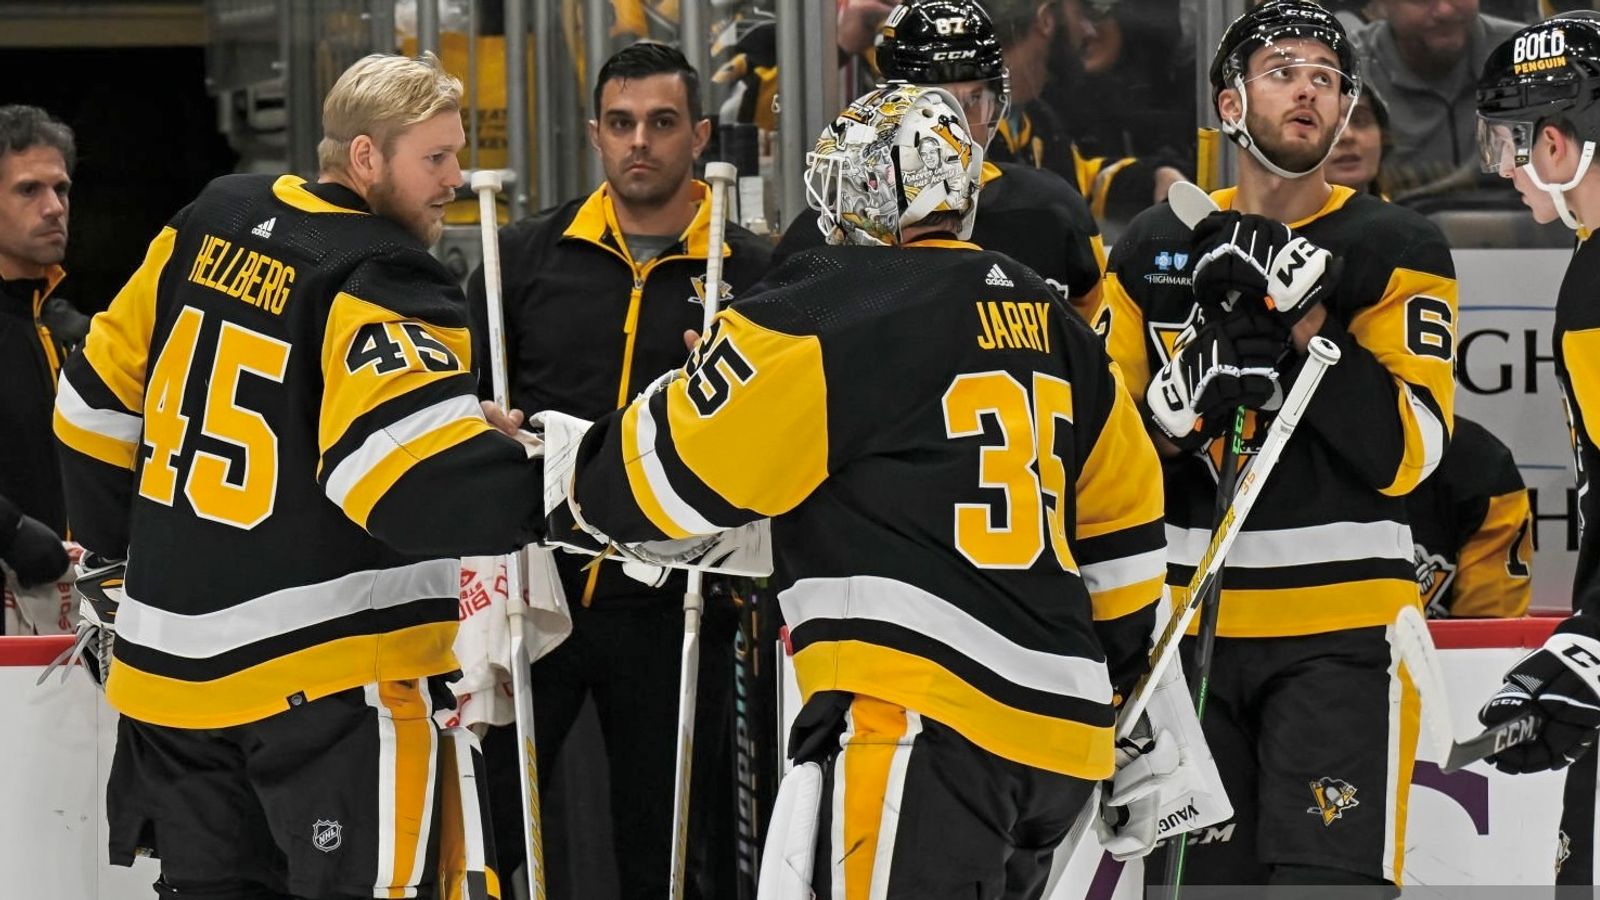 Penguins goaltender Tristan Jarry has new look to go with new contract